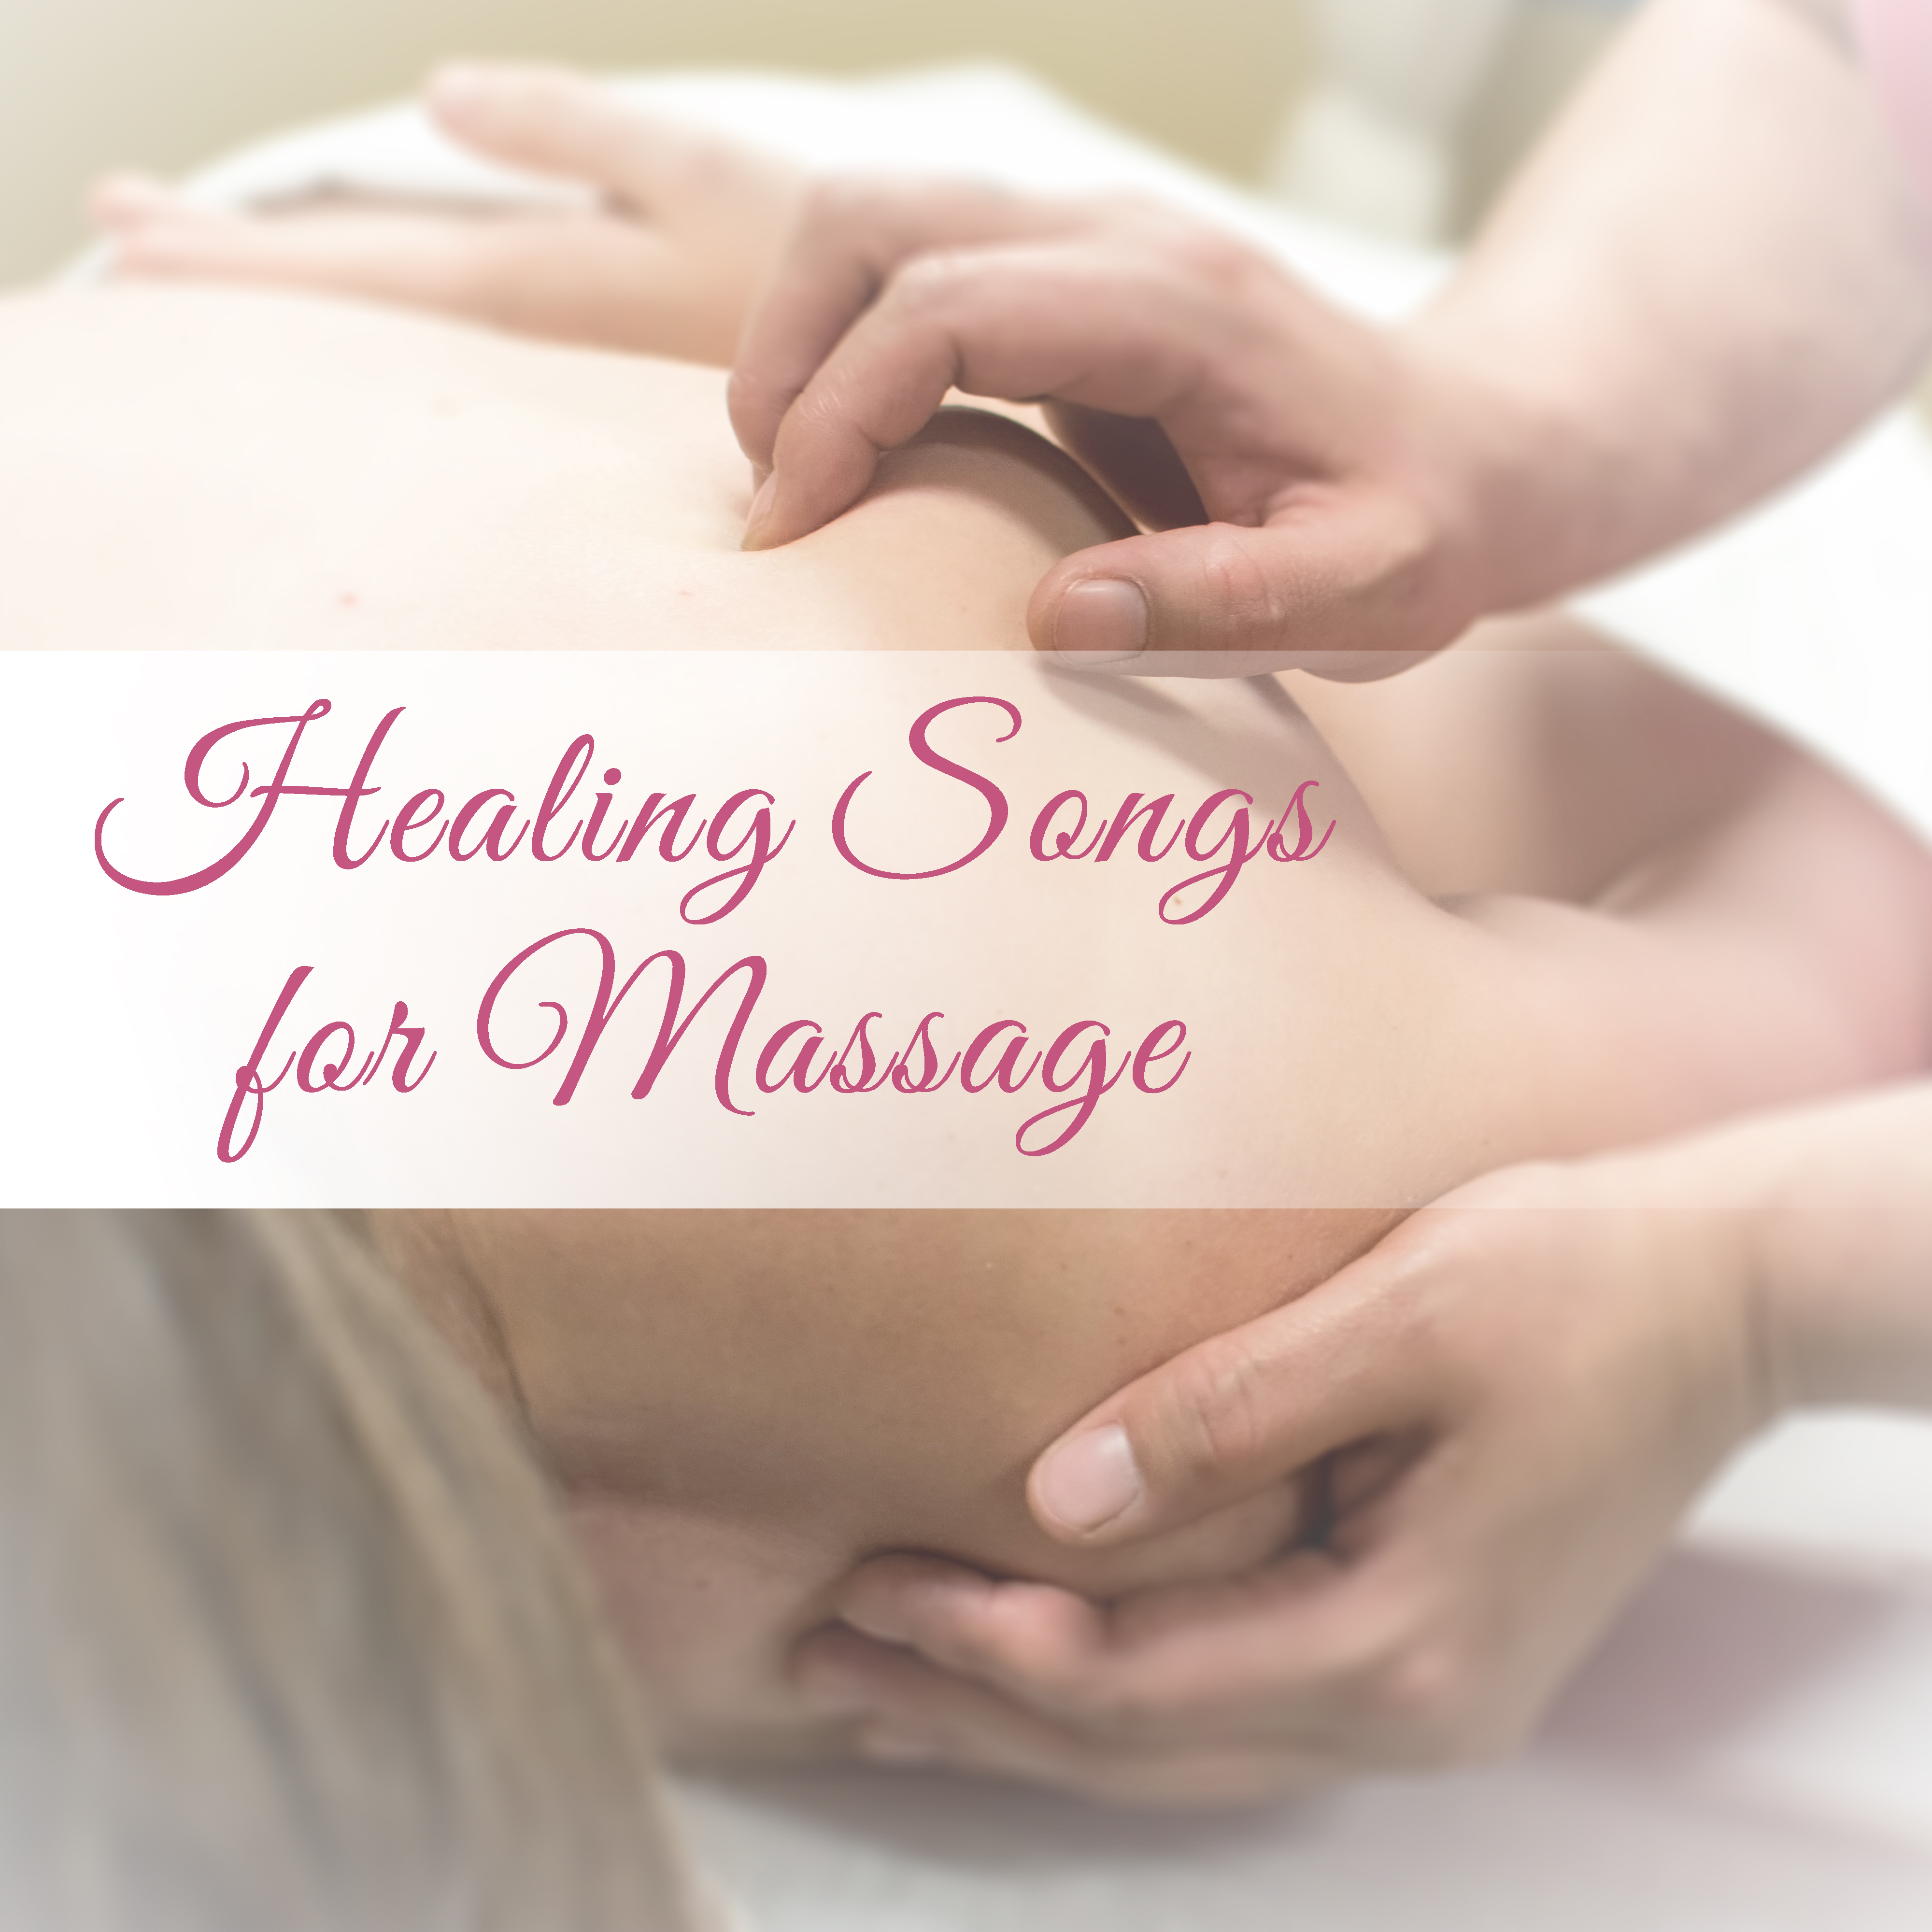 Healing Songs for Massage  Relaxing Music for Massage Therapy, Spa Wellness